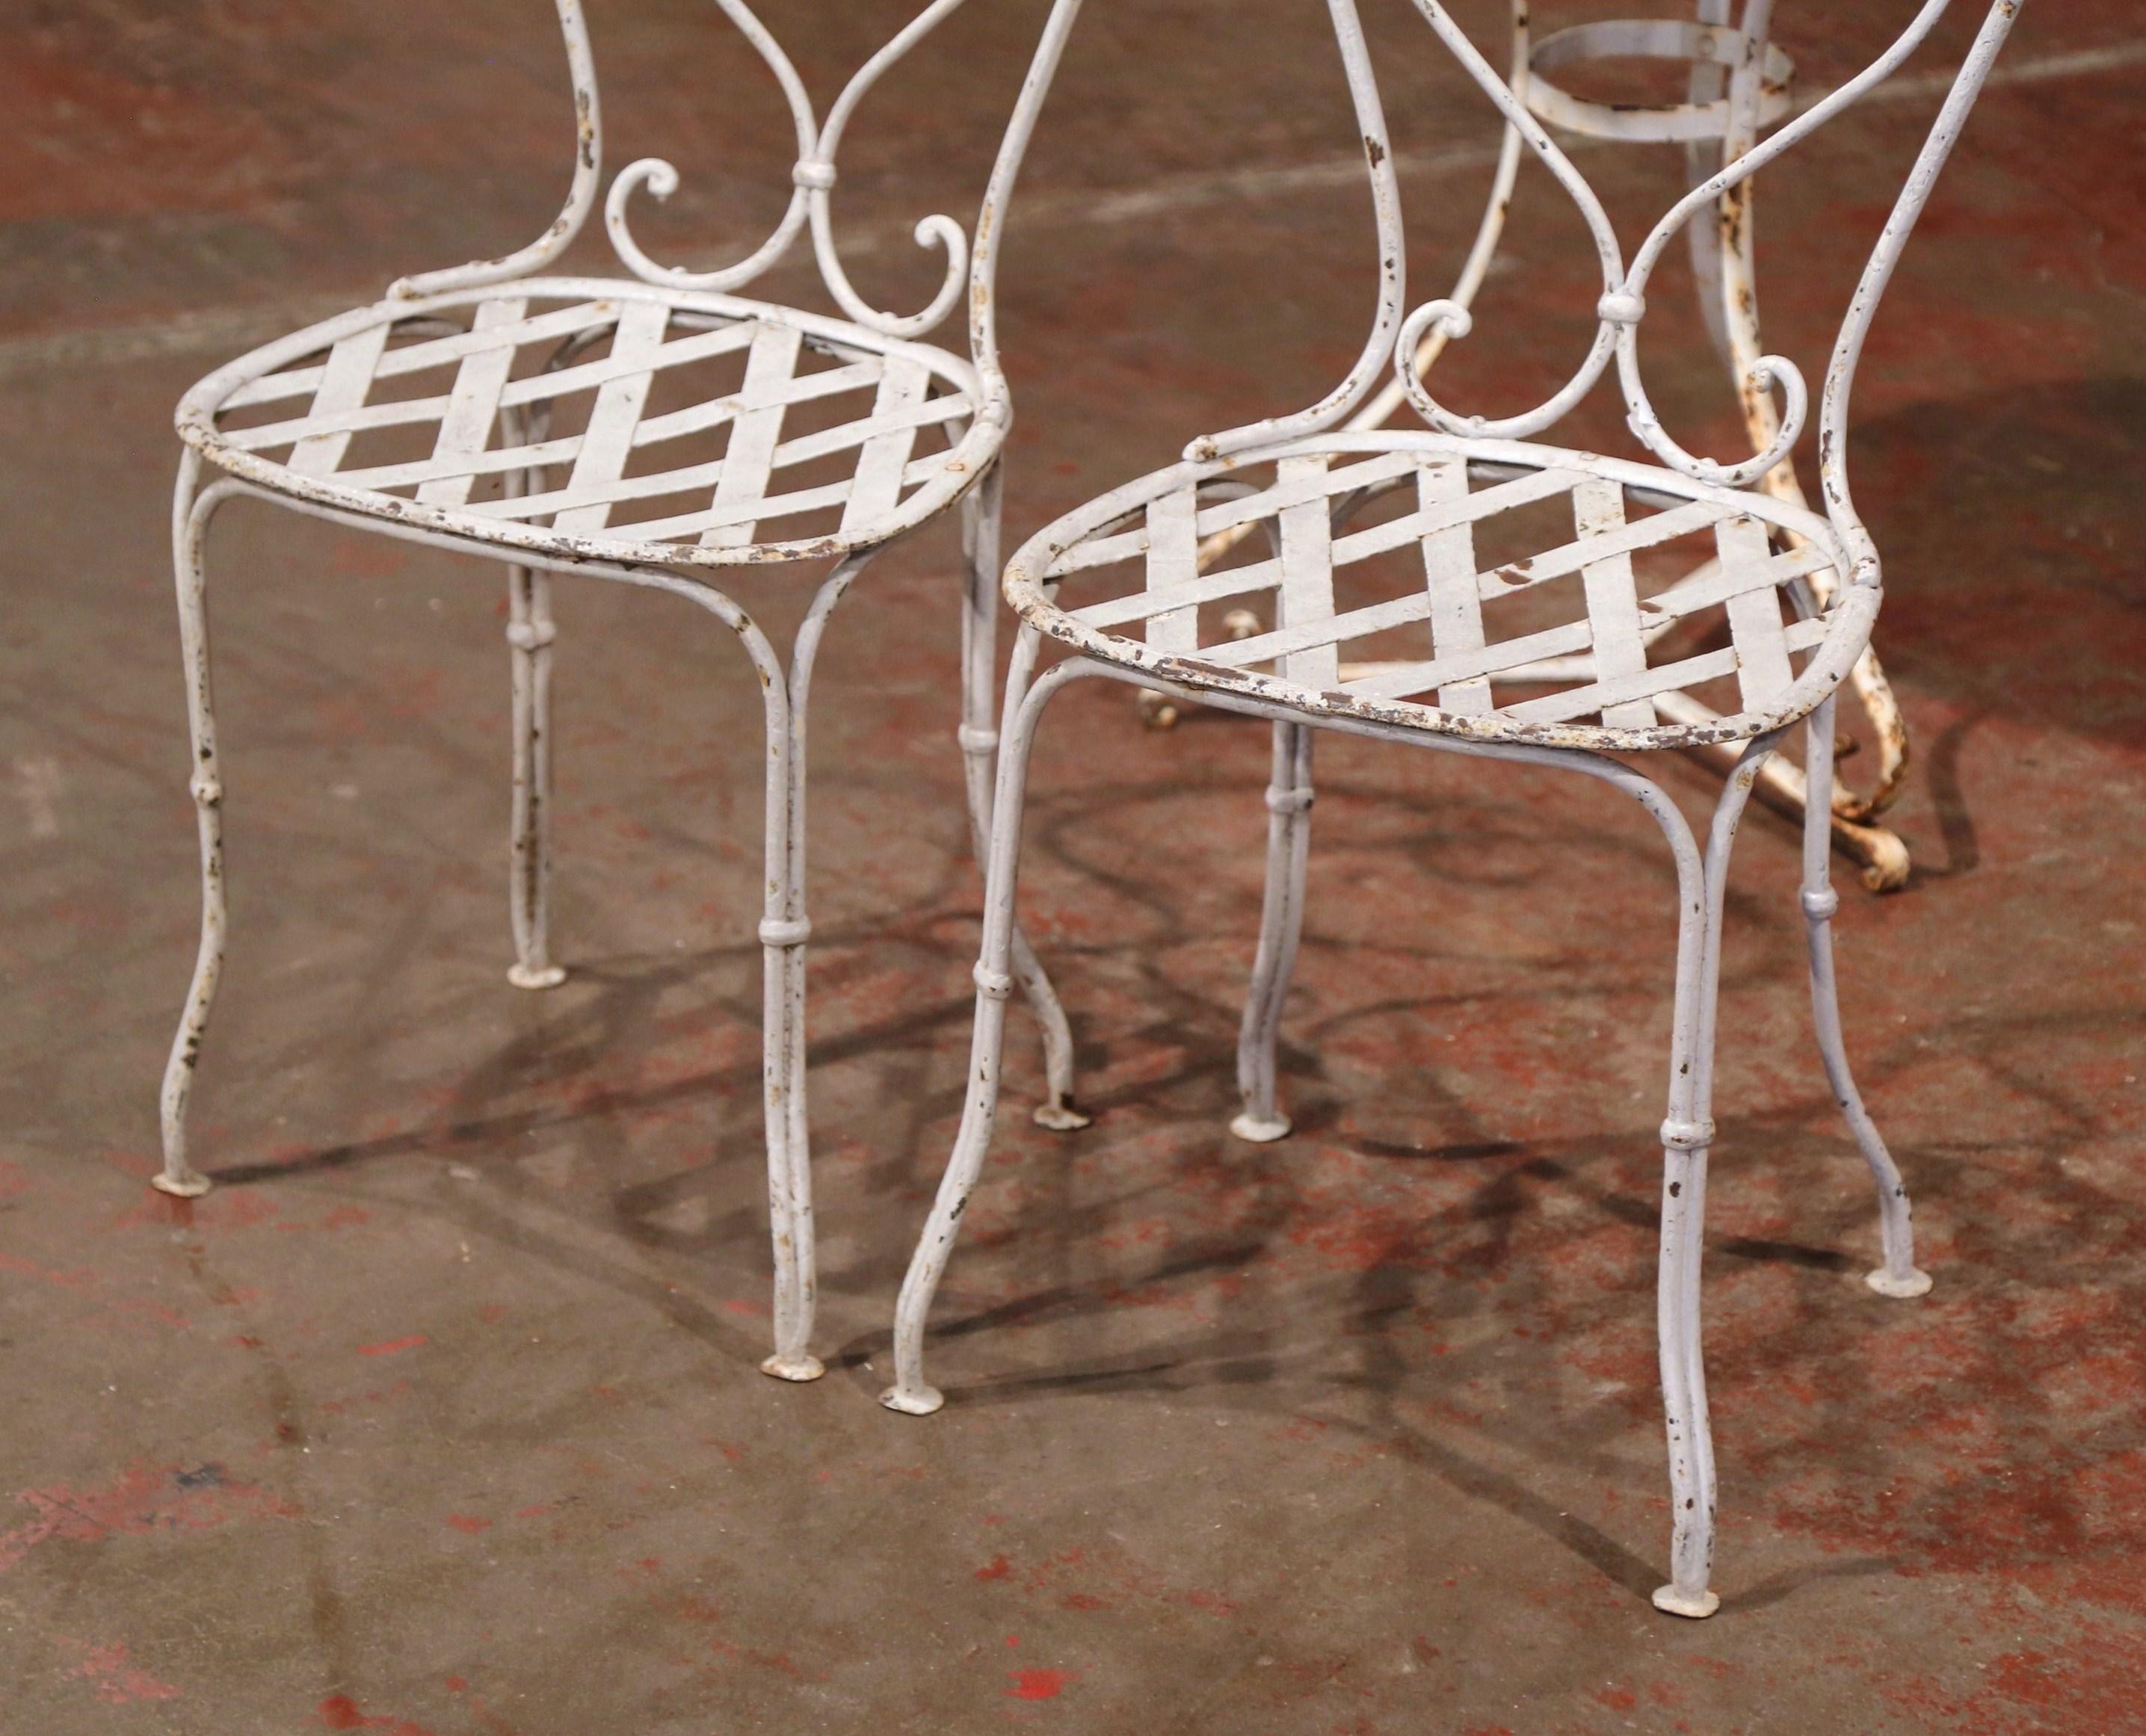 Decorate an outdoor or a patio with these antique Bistrot chairs. Crafted in France circa 1880, each chair features a back with scroll decor and a seat with weave decor. The chairs are in excellent condition commensurate with age and use and adorn